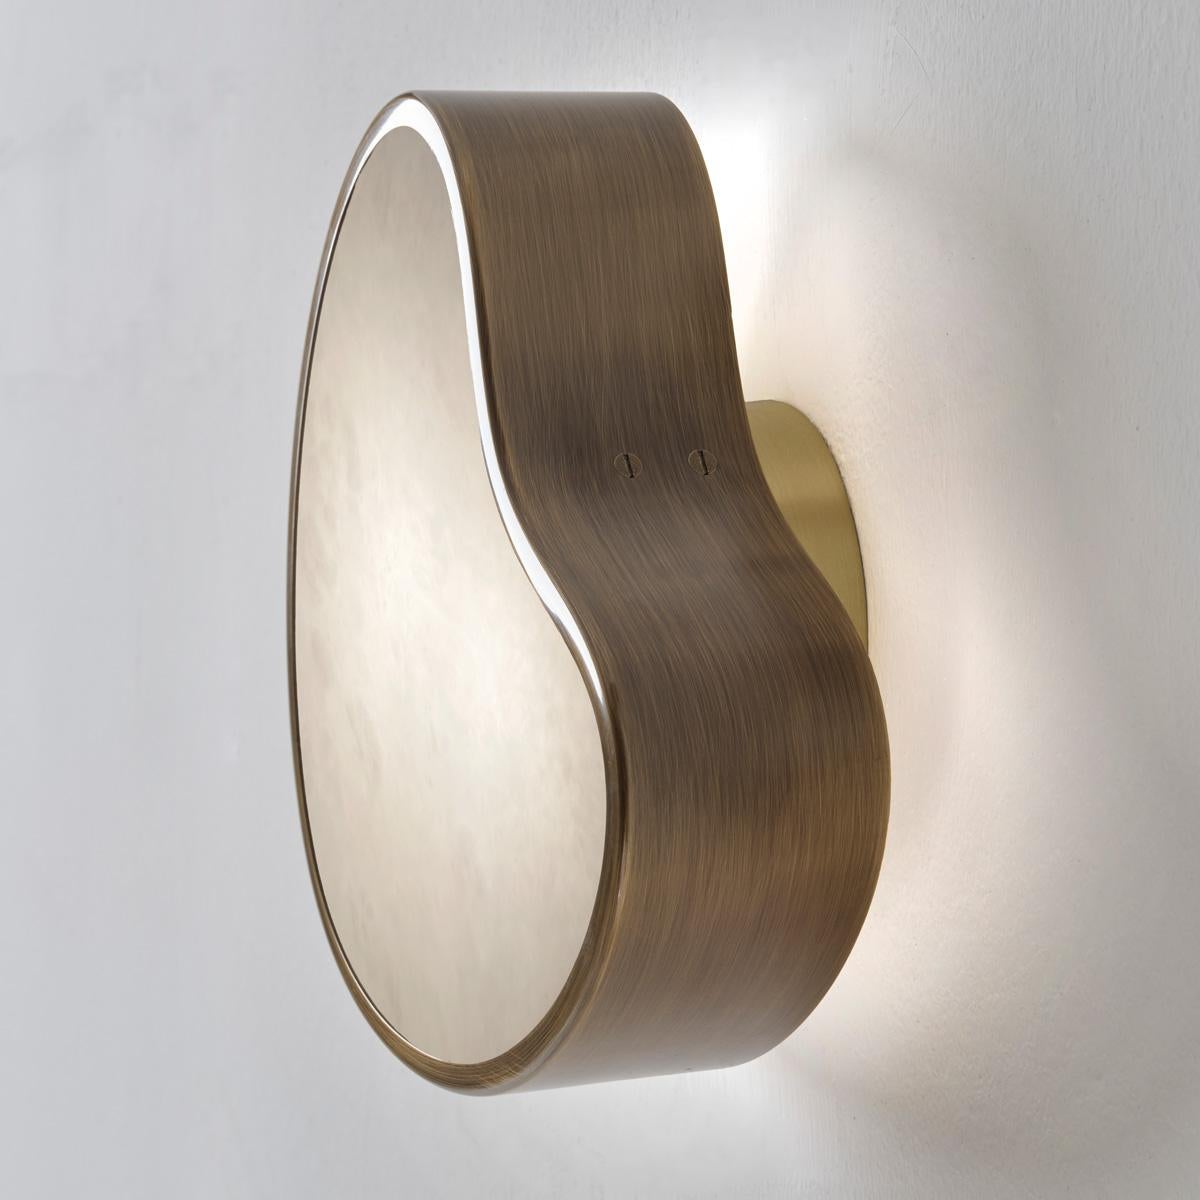 Cuore Wall Light by Gaspare Asaro. Backlit Version. Bronze Finish For Sale 4